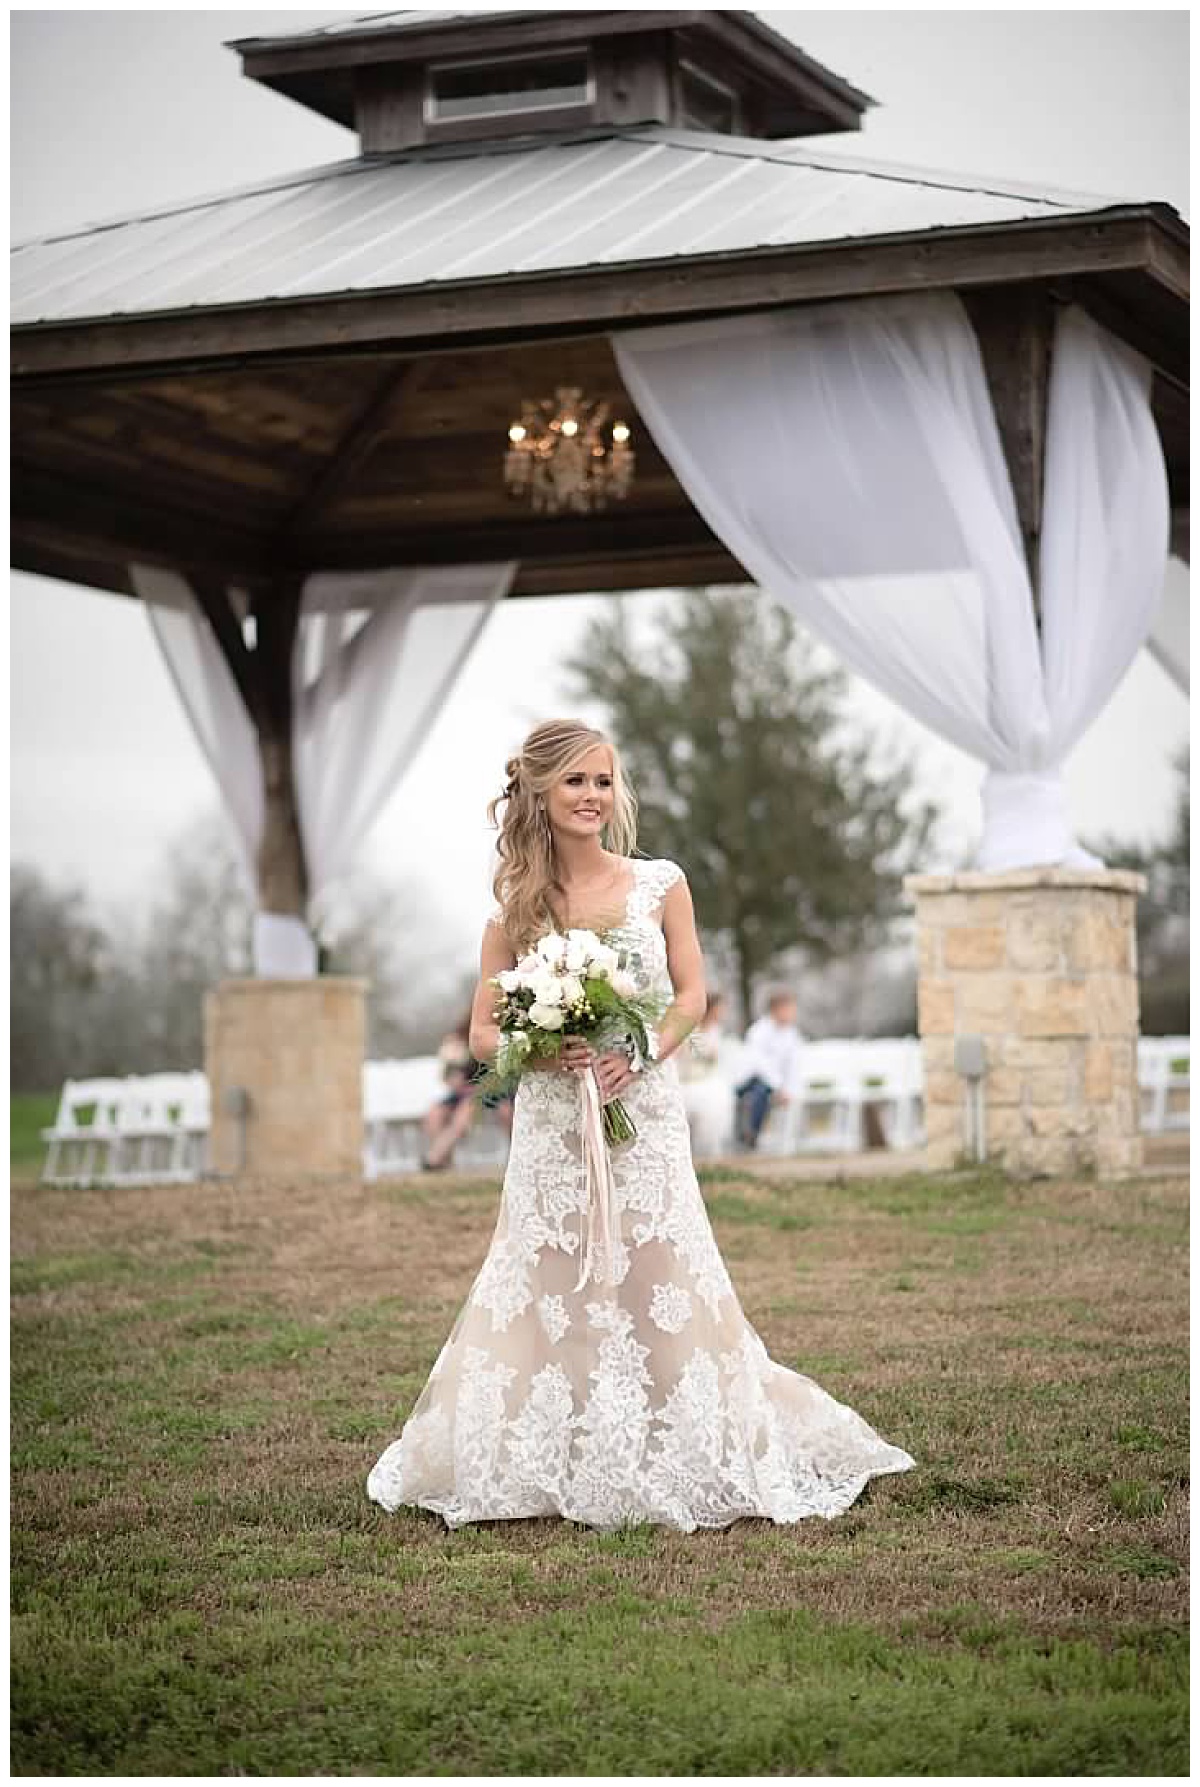 The Bride with her Bridal Bouquet behind her Ceremony space at Emery's Buffalo Creek